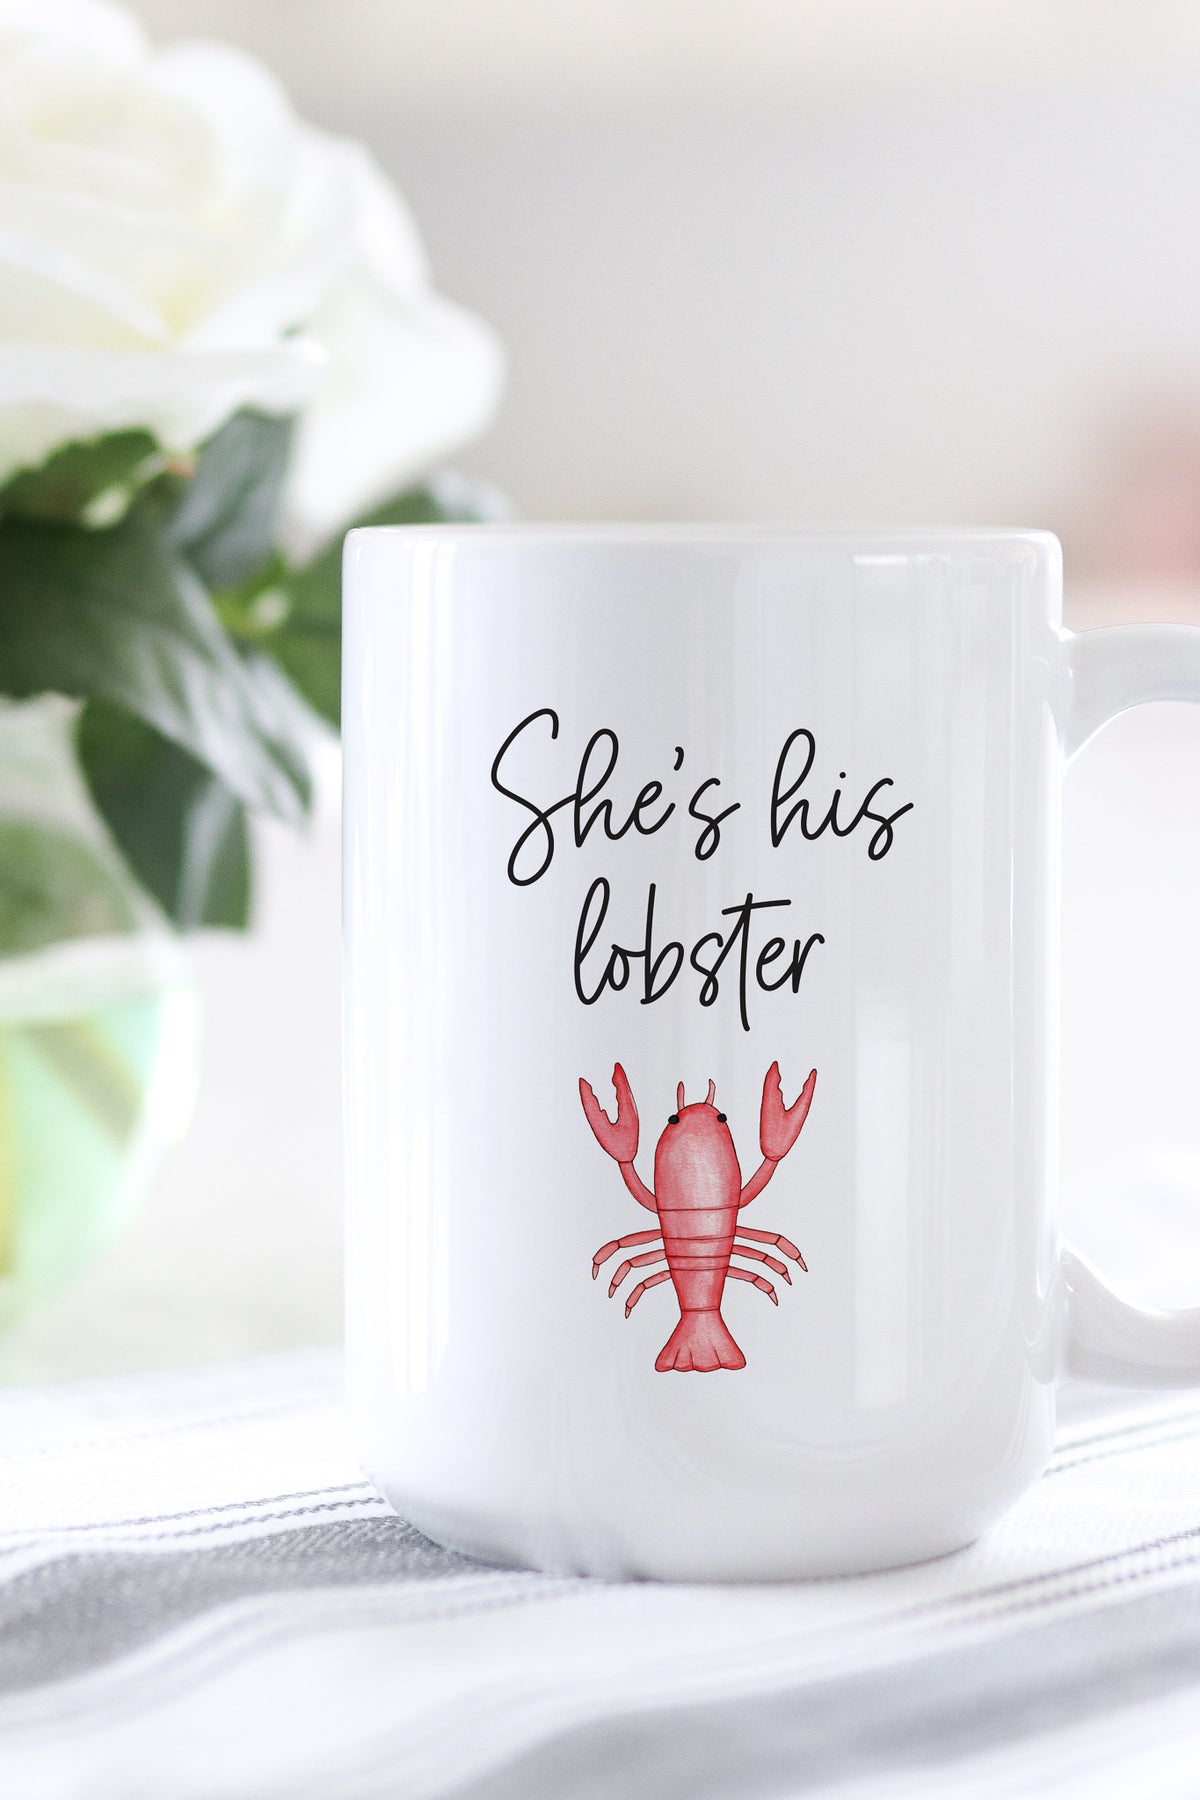 She's his lobster. This is the perfect mug for anyone who loves all things Friends! 